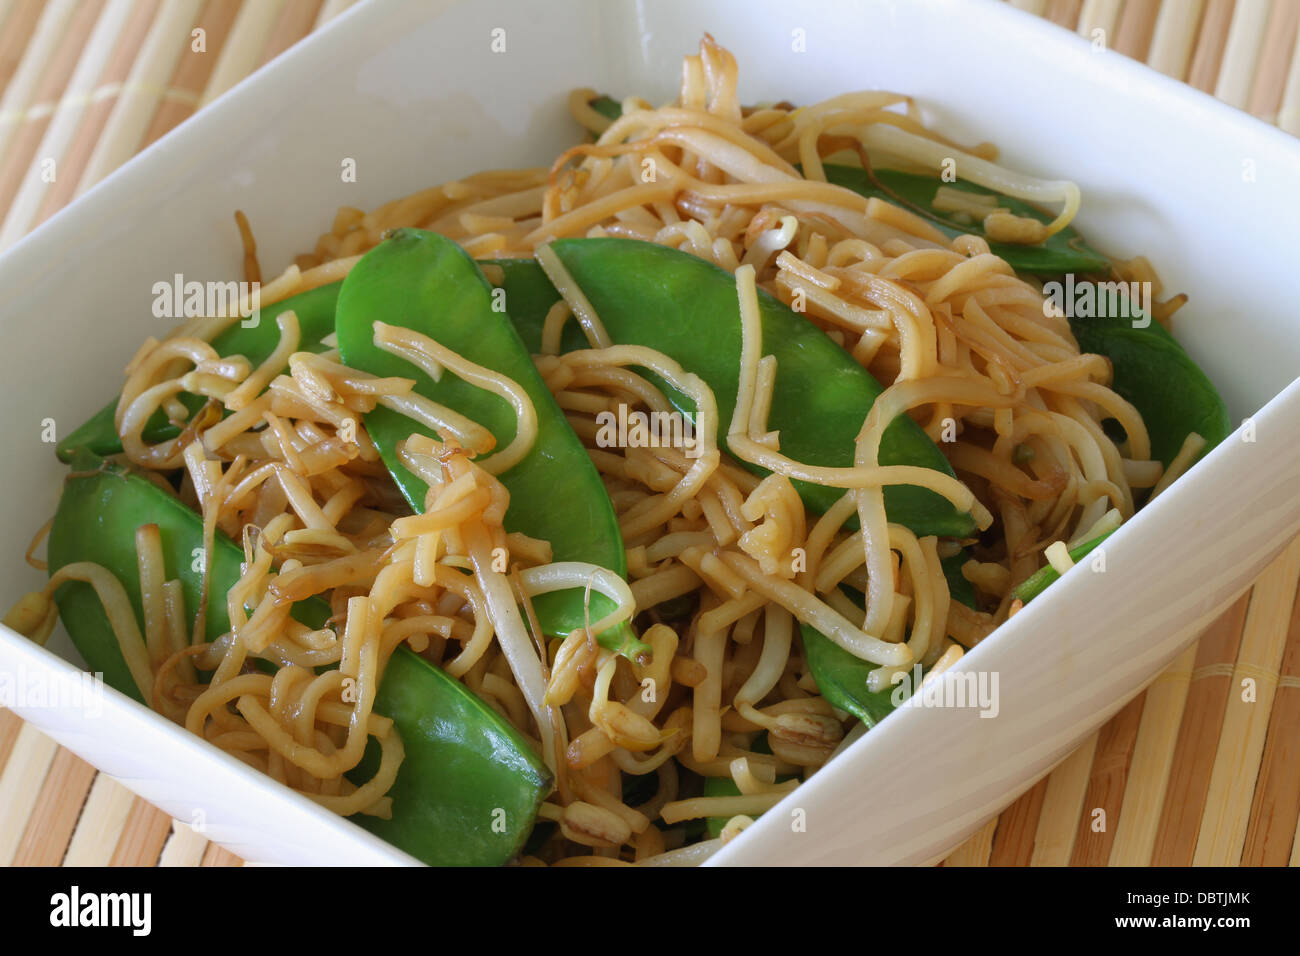 Bowl of egg noodles stir fried with snow peas and beansprouts Stock Photo